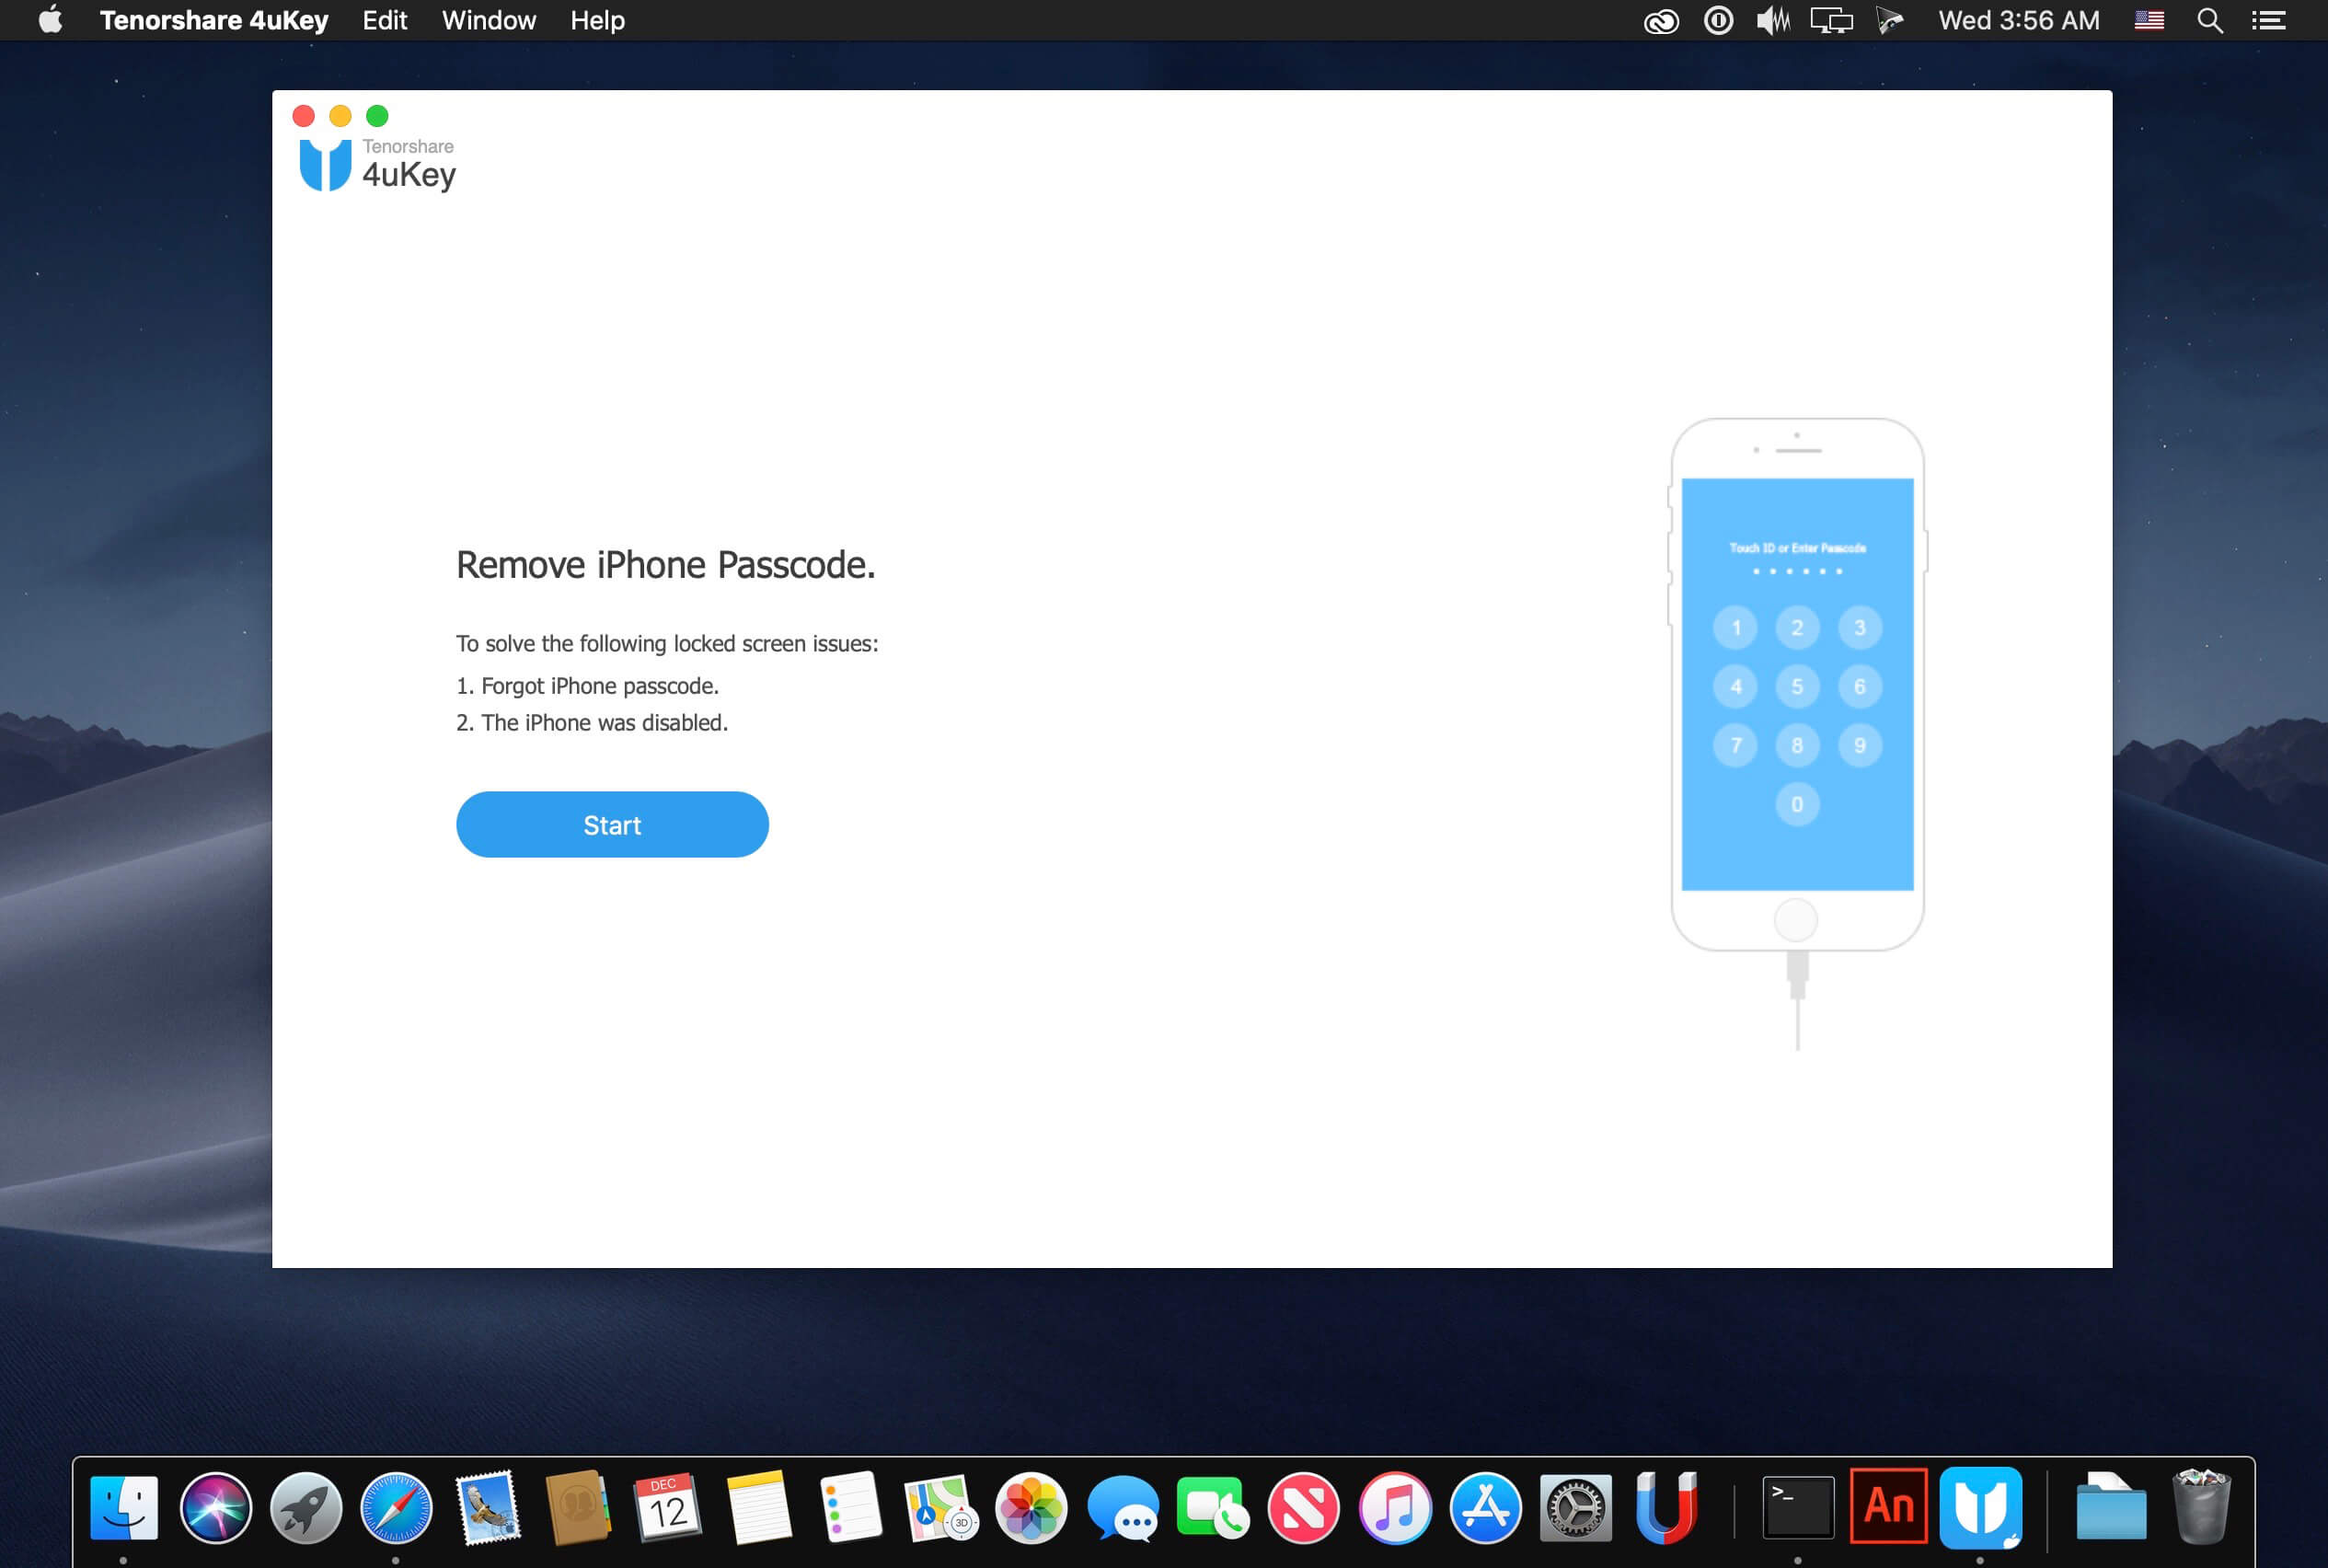 Tenorshare 4uKey Password Manager 2.0.8.6 instal the last version for apple